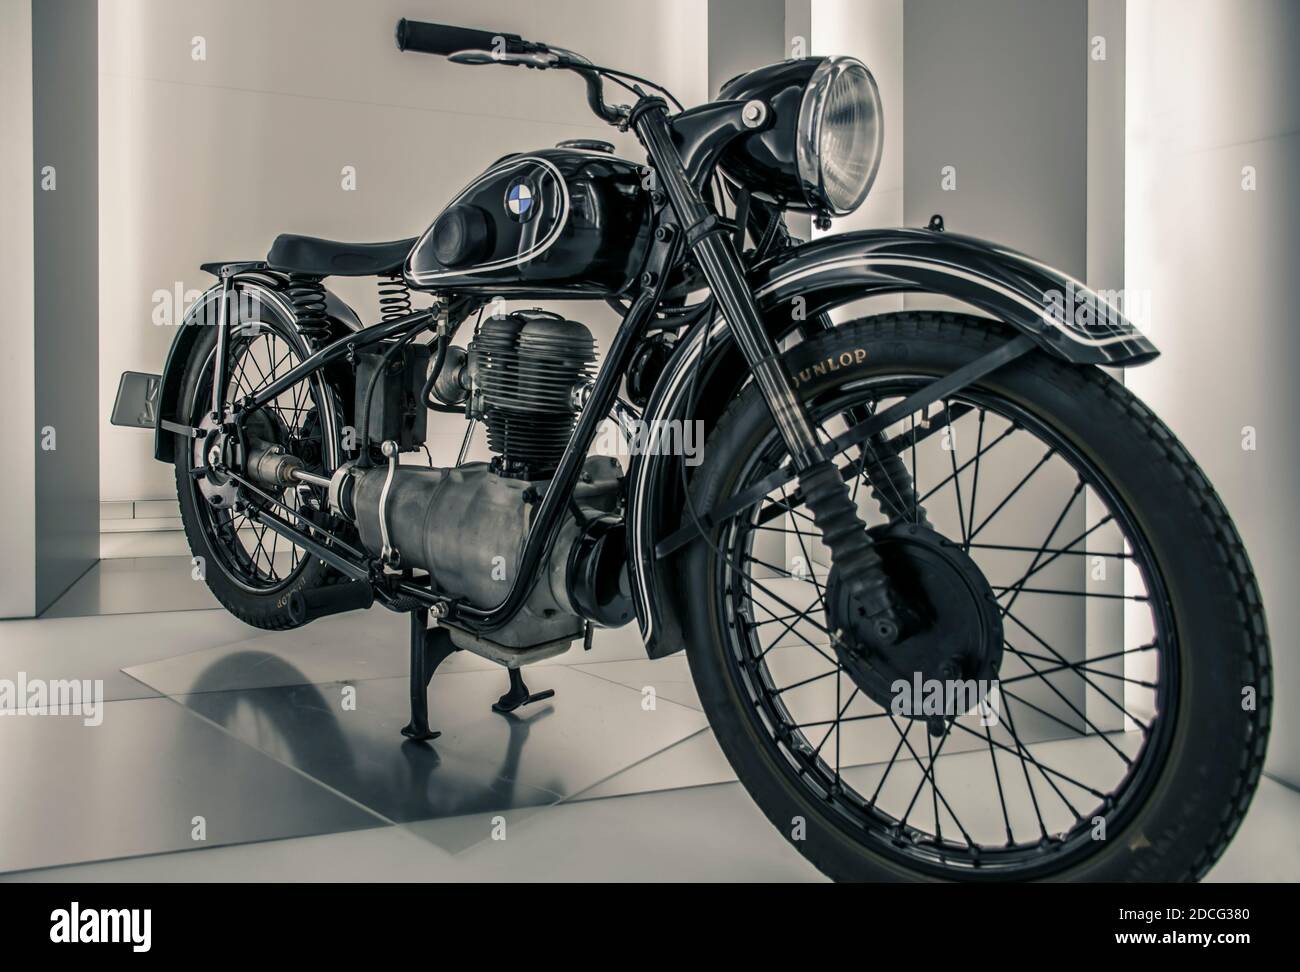 Munich/ Germany - May, 24 2019: 1949 BMW R 24 motorcycle at BMW Museum/ BMW Welt Stock Photo